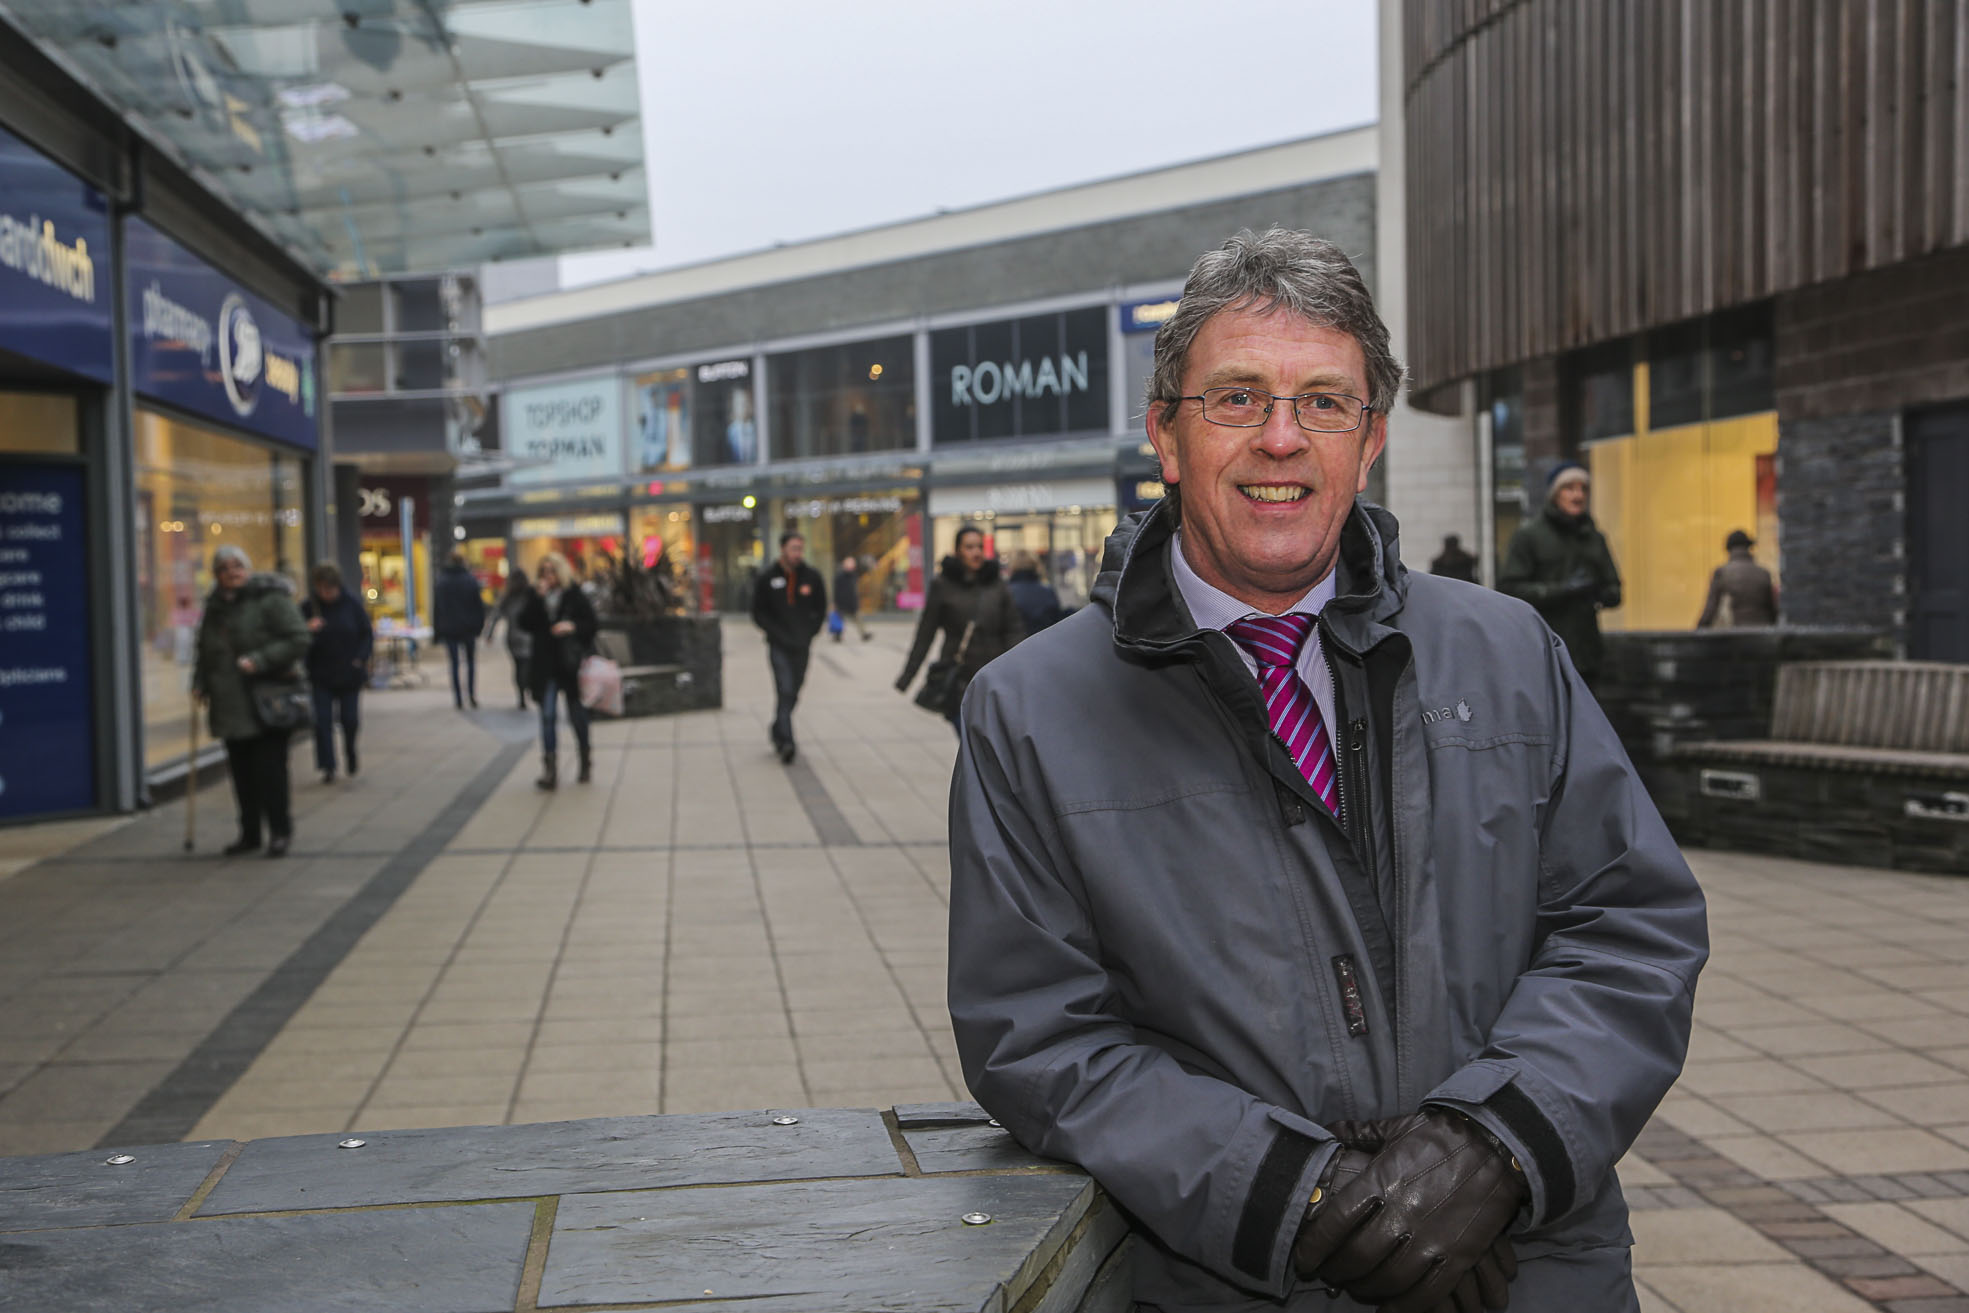 New survey shows shopping centre is bucking national trend